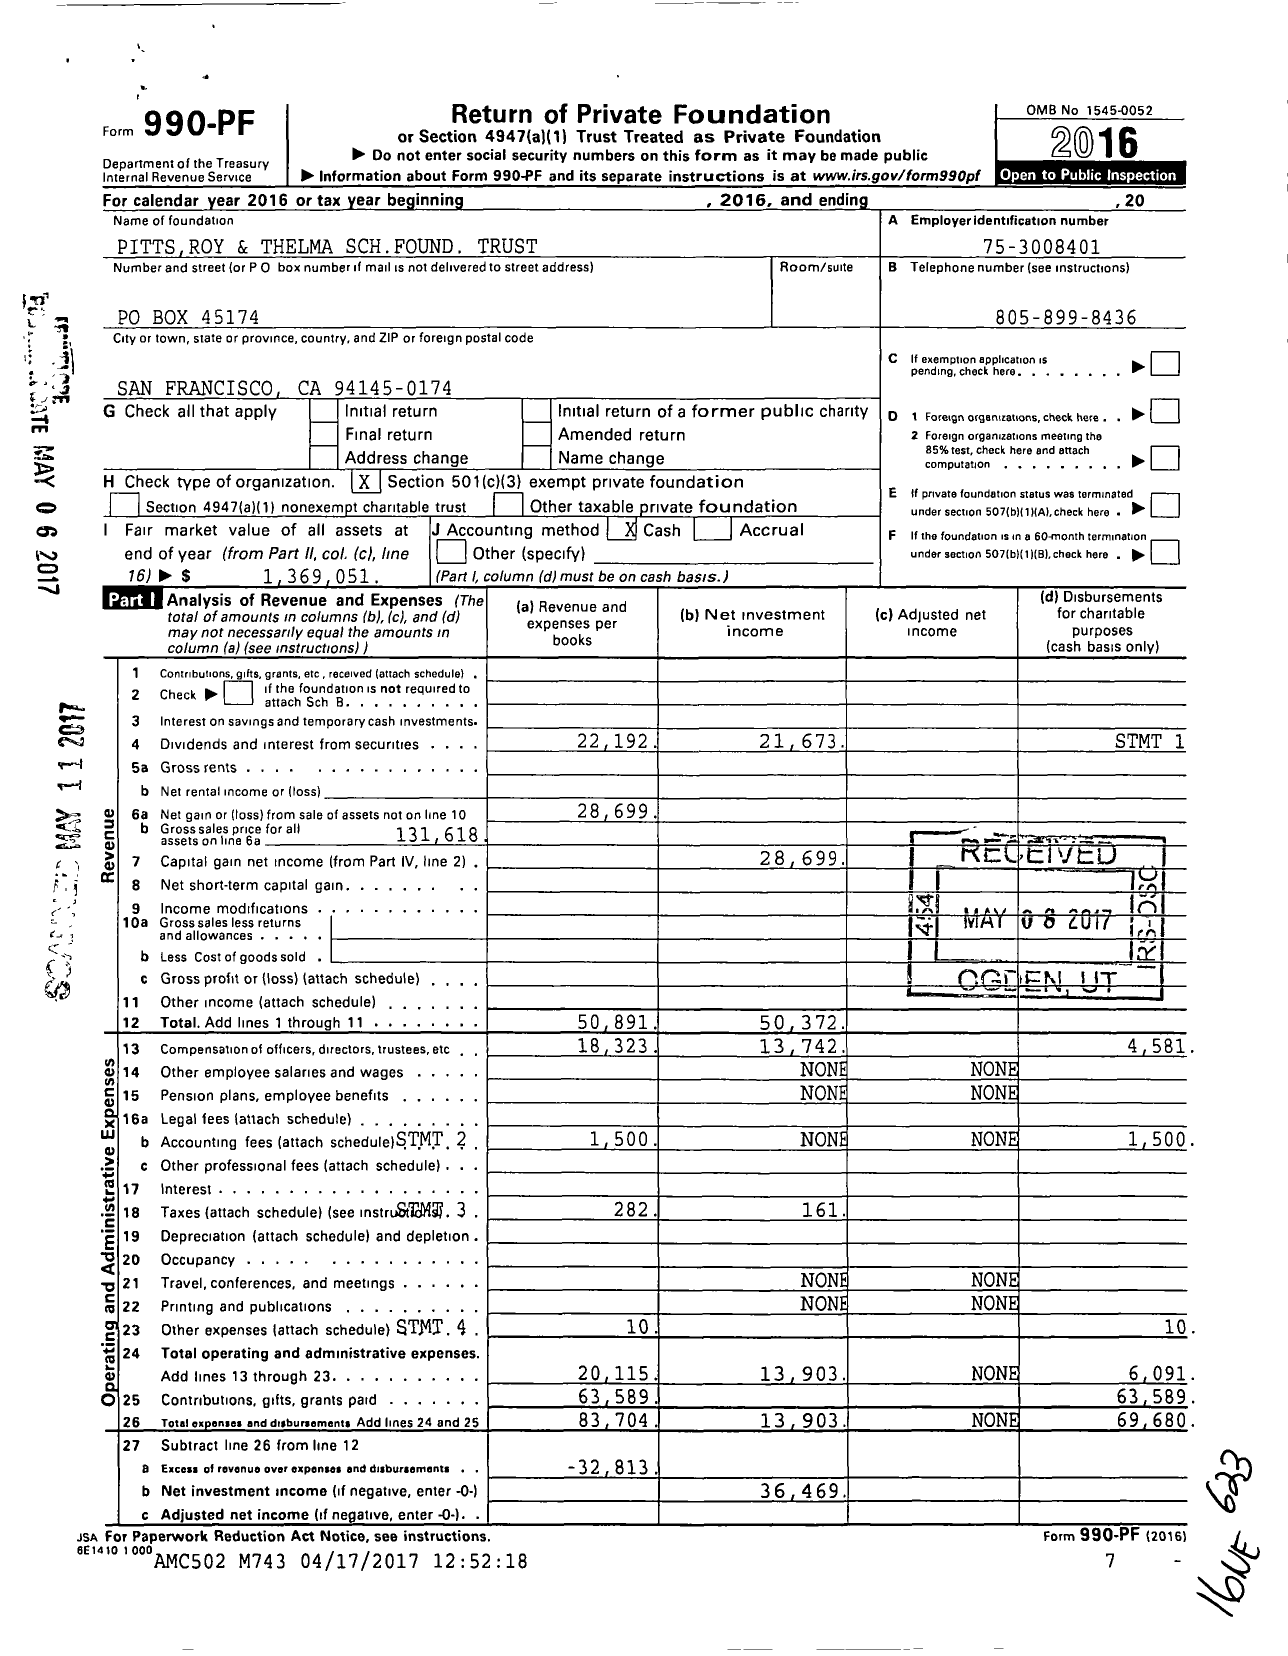 Image of first page of 2016 Form 990PF for Pittsroy and Thelma Schfound Trust